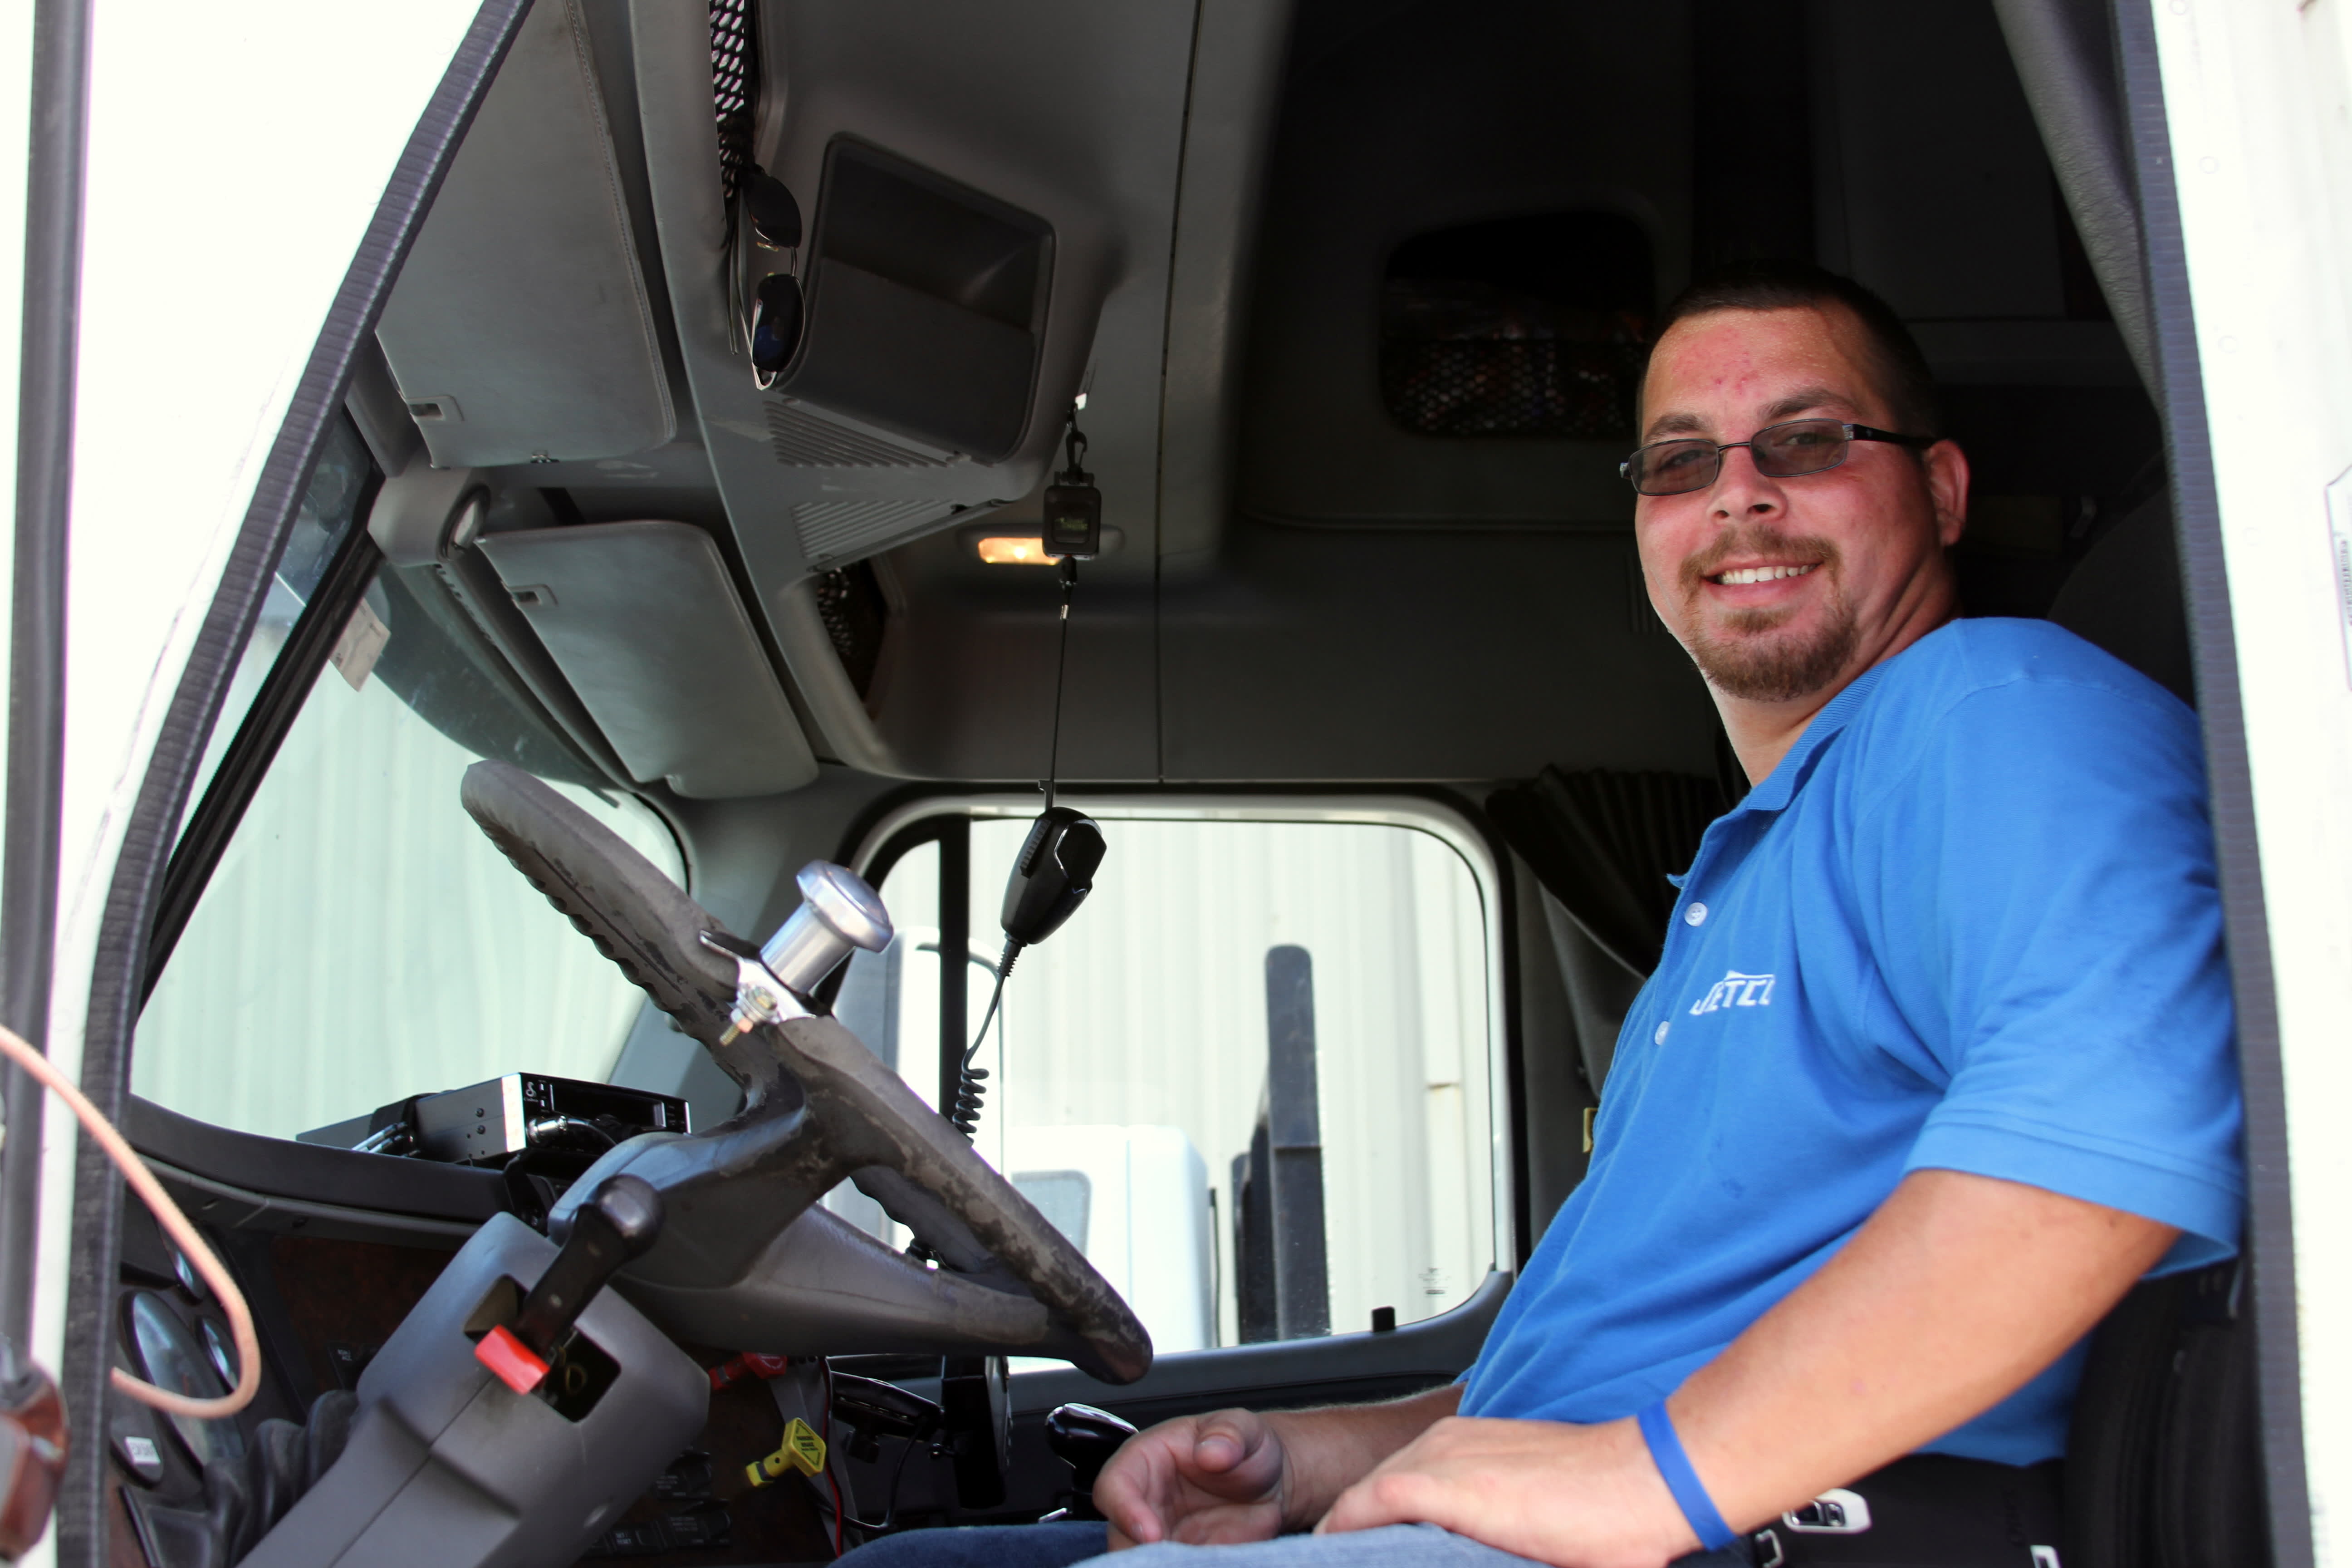 Is a special license necessary to obtain a job driving small trucks?